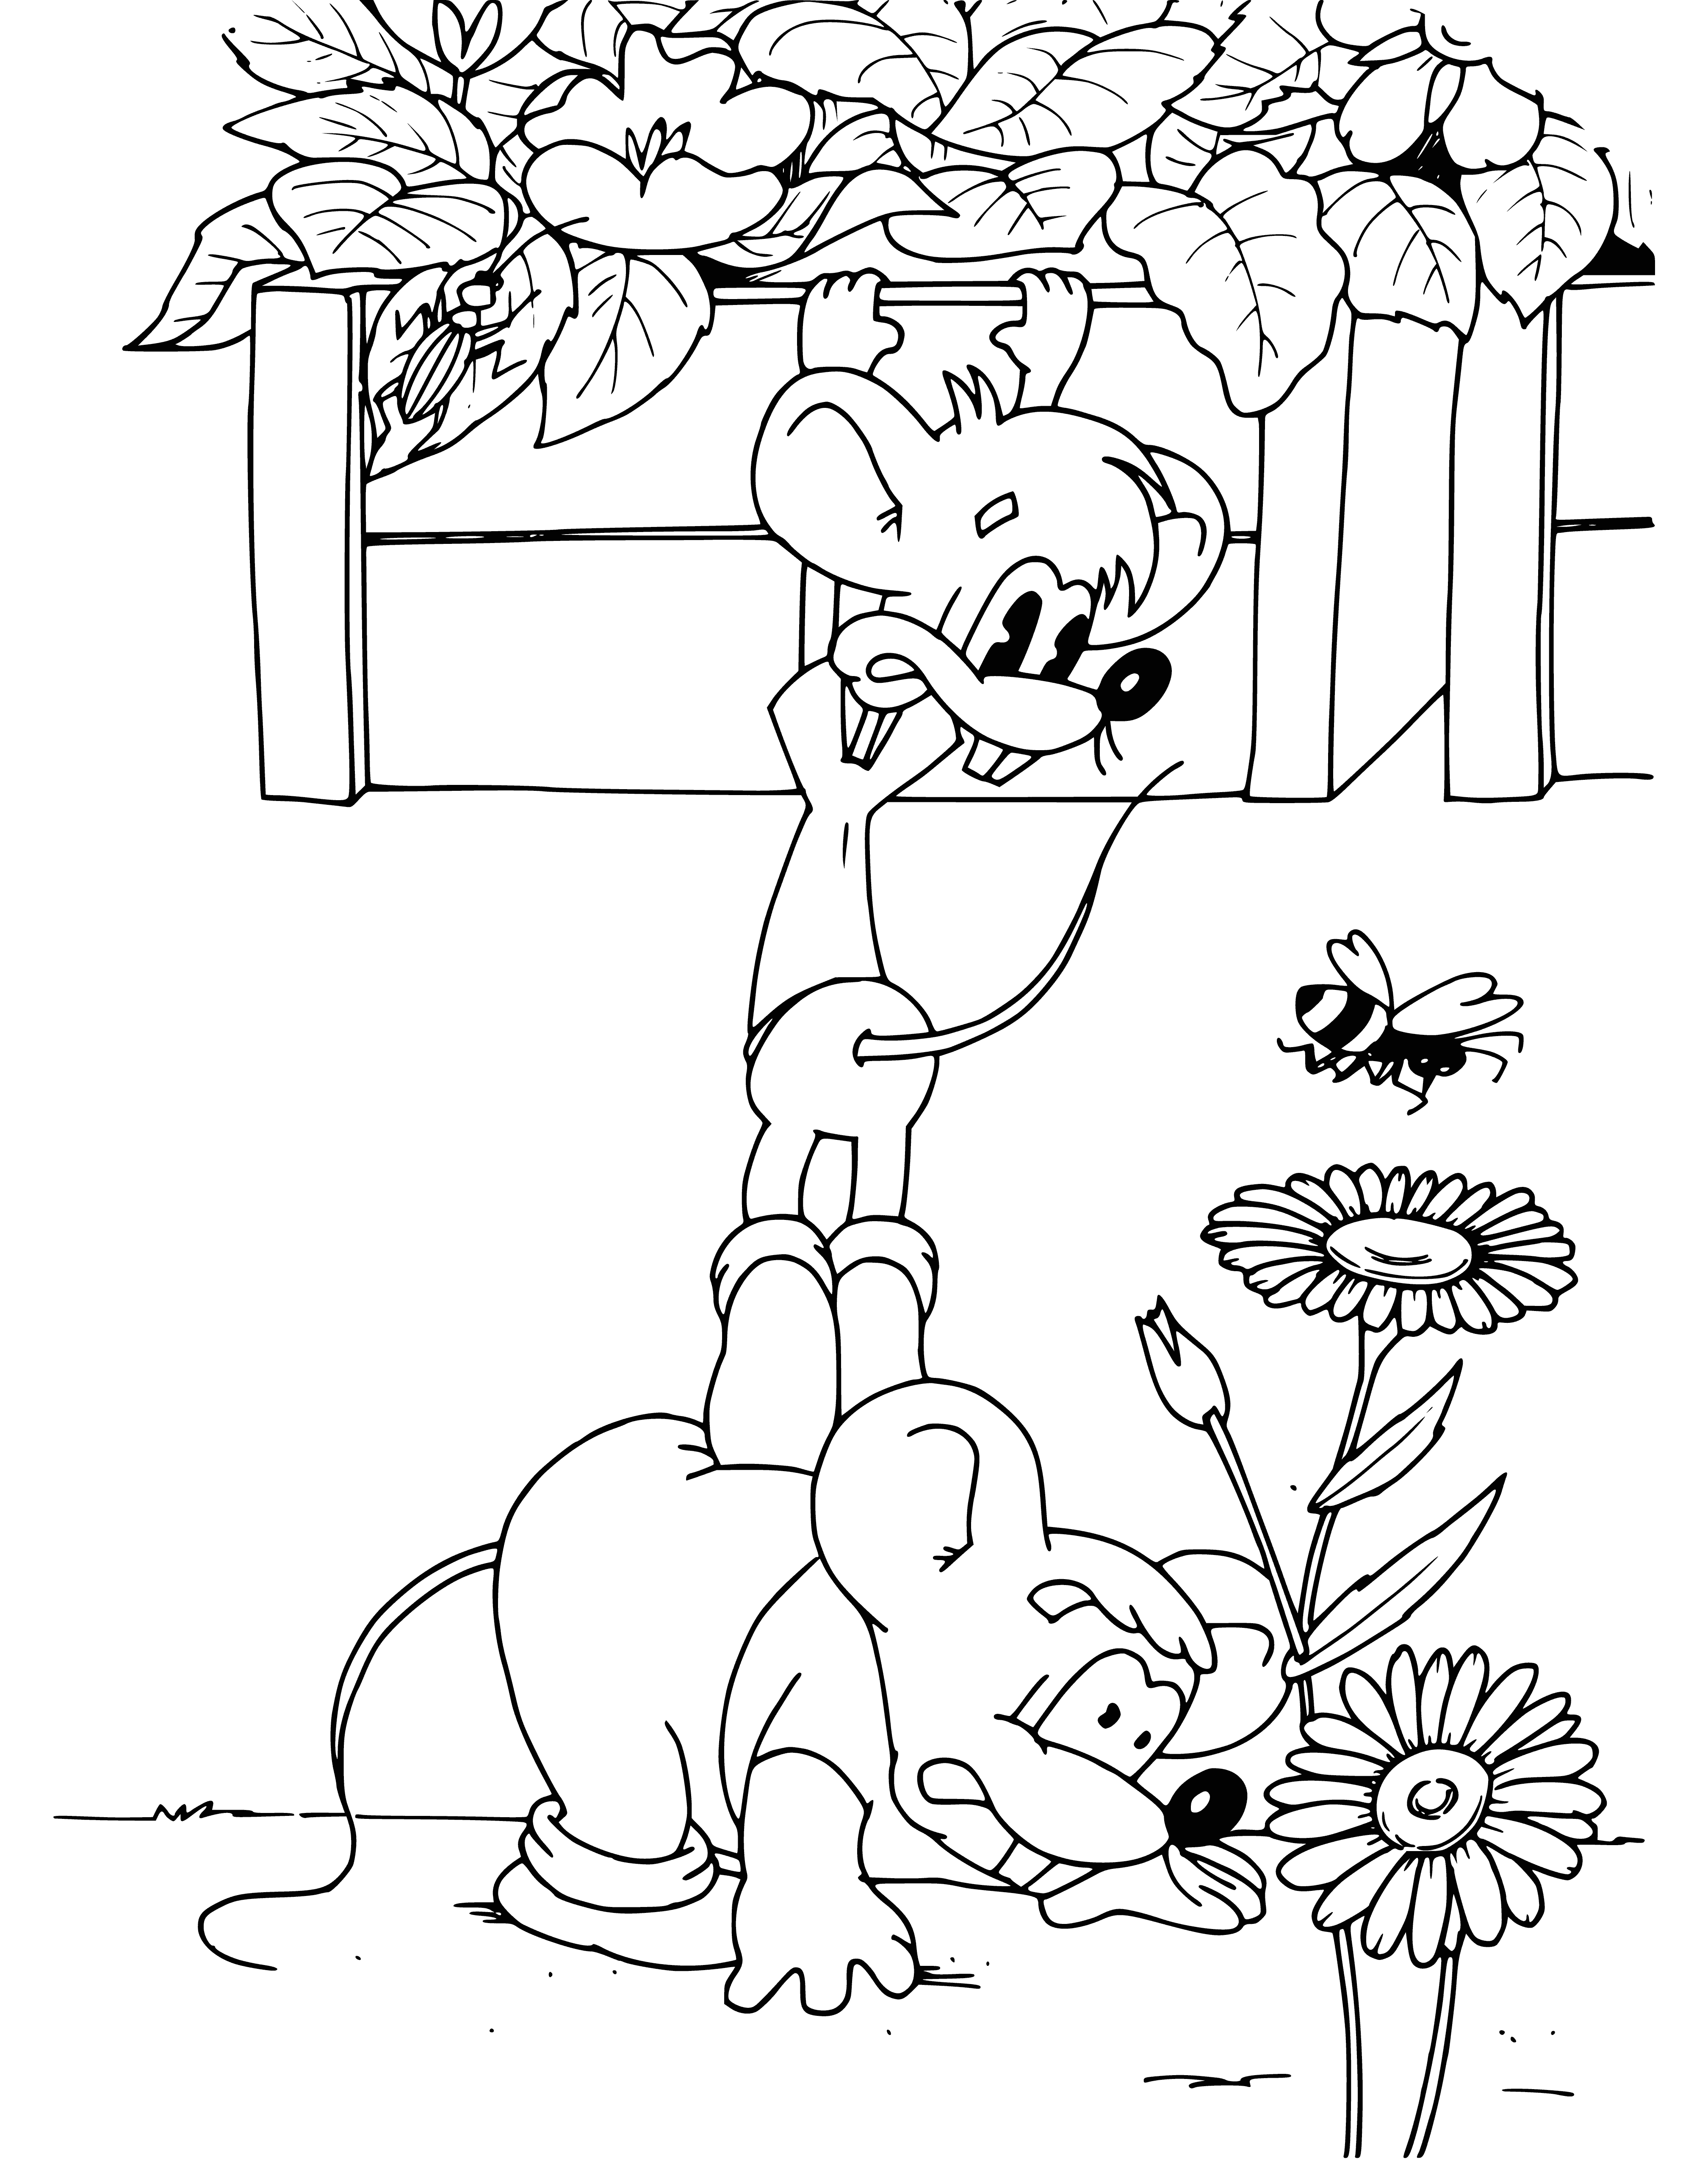 coloring page: Leopold the Cat happily watches the mouse, who has cheese dripping from its face, as it chews on cheese.